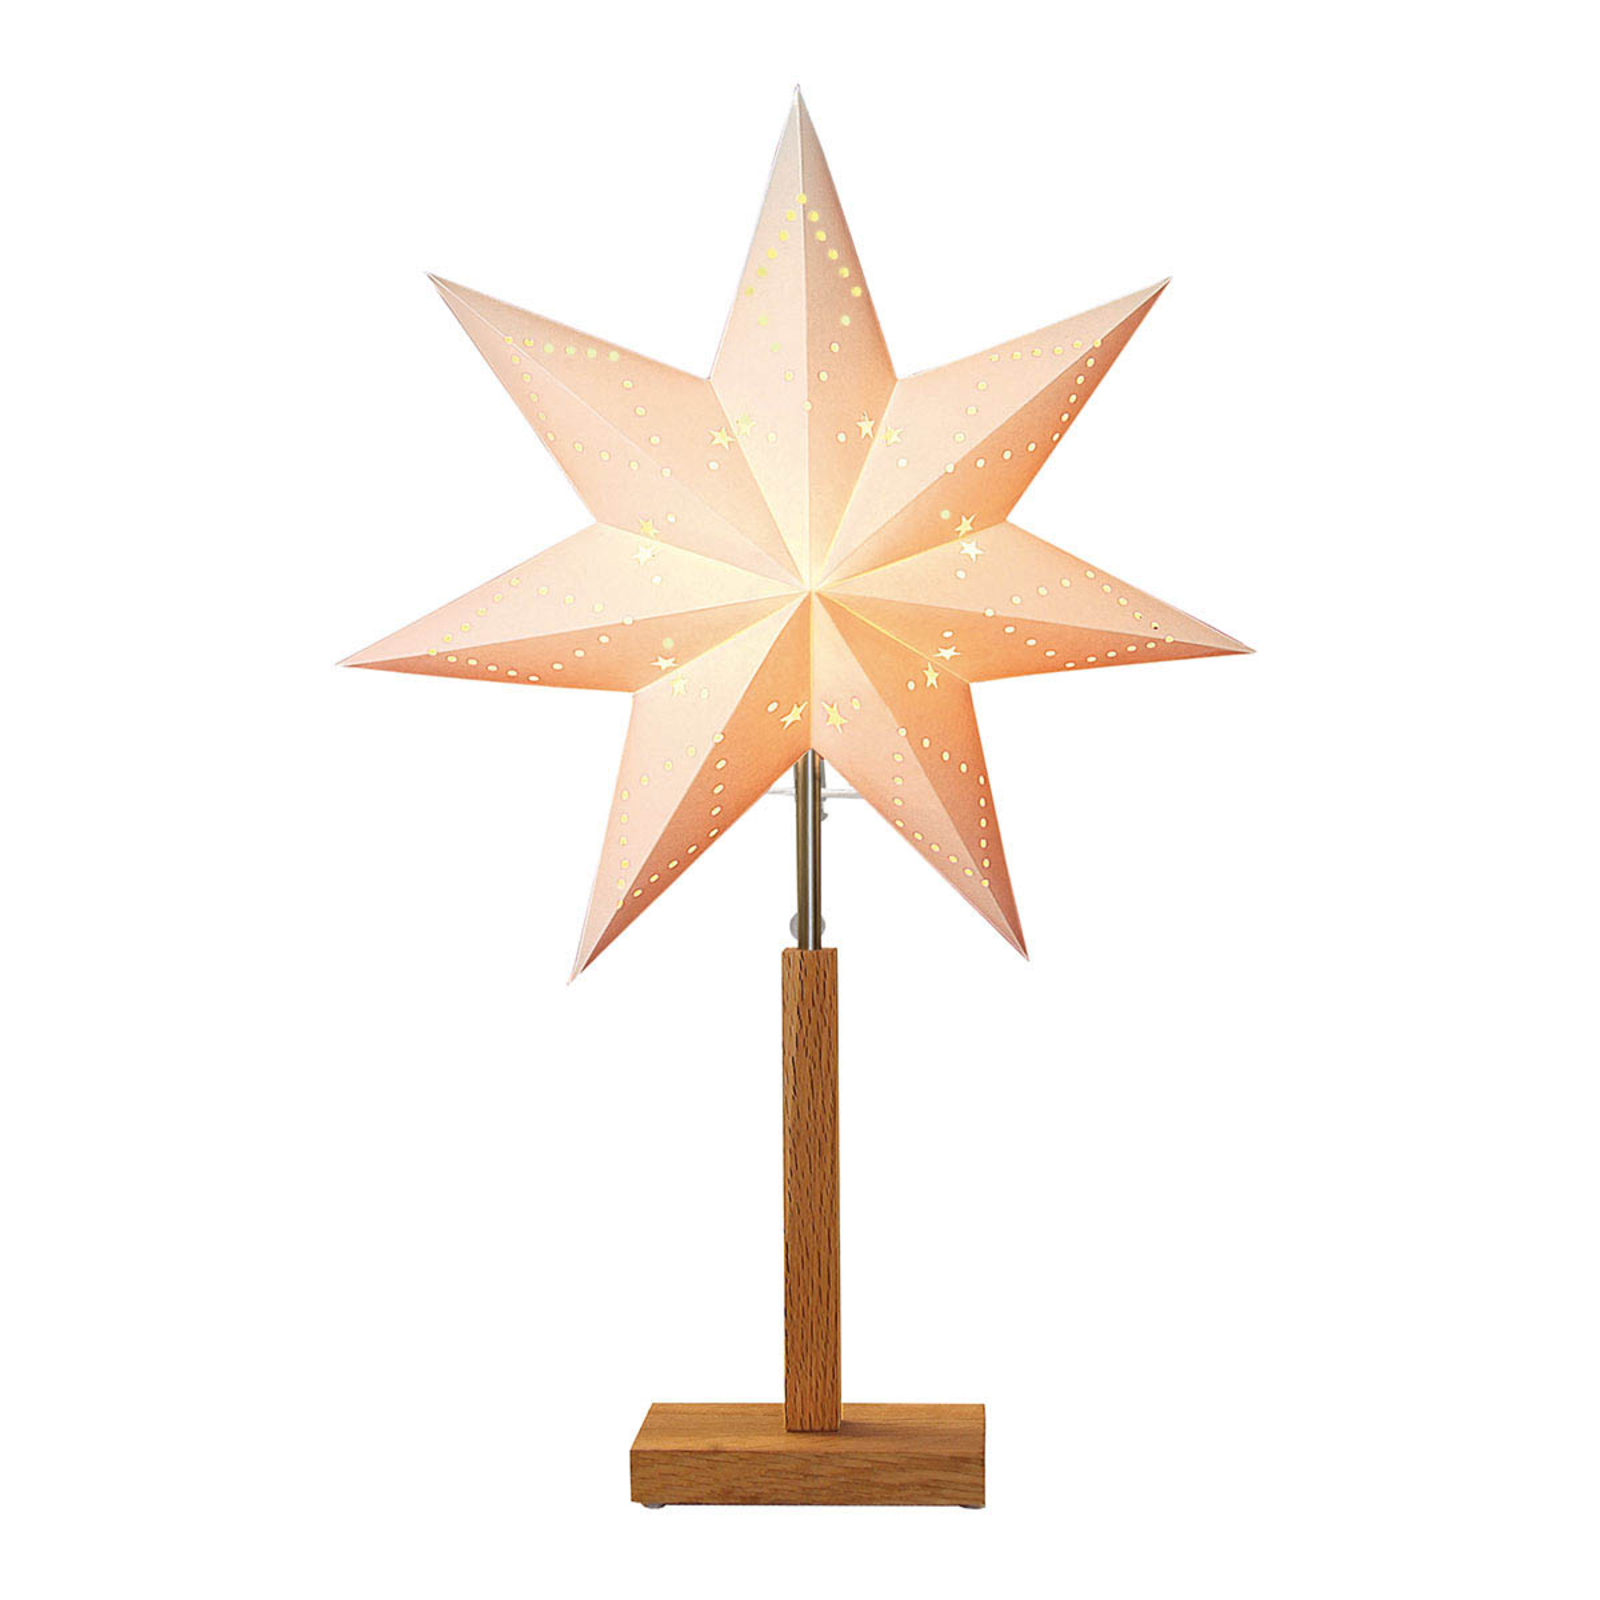 Karo decorative light with a patterned star 55cm